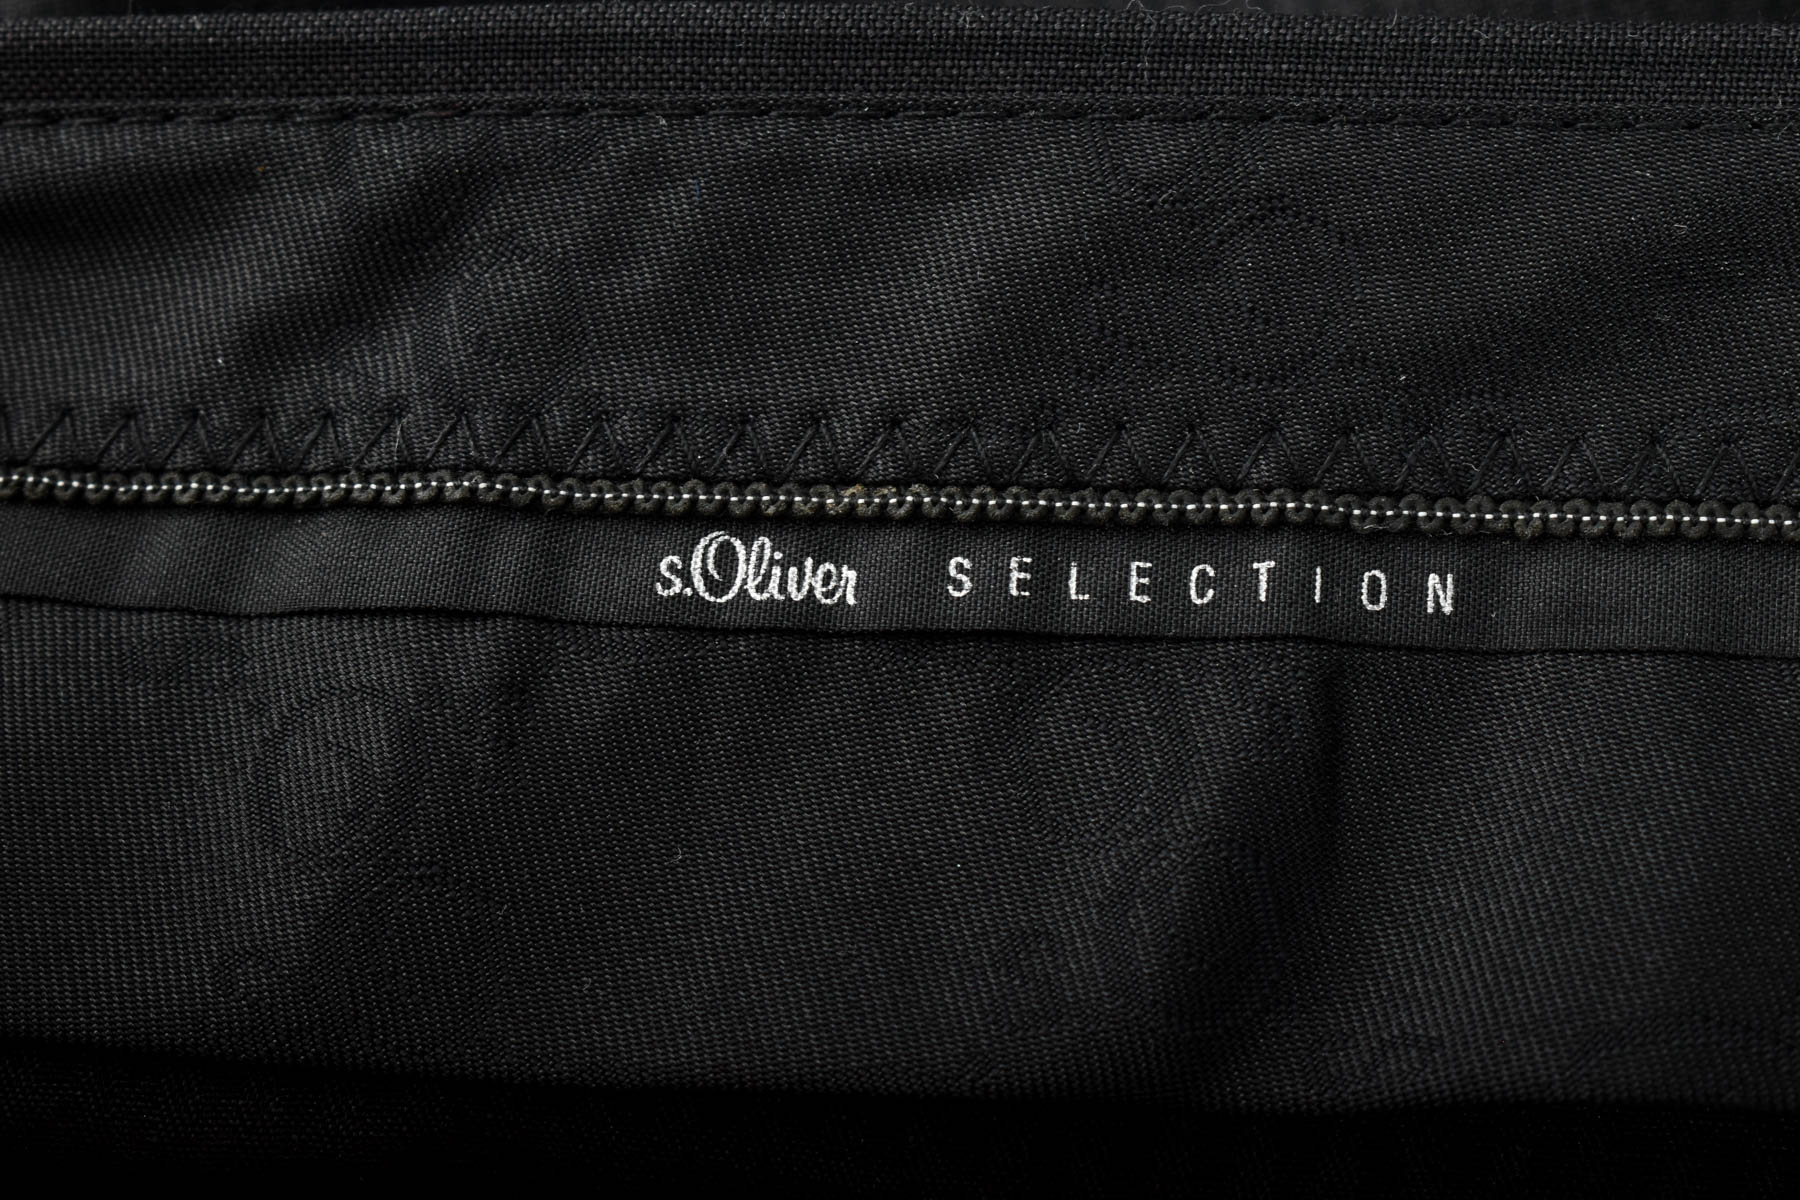 Men's trousers - SELECTION by S.Oliver - 2